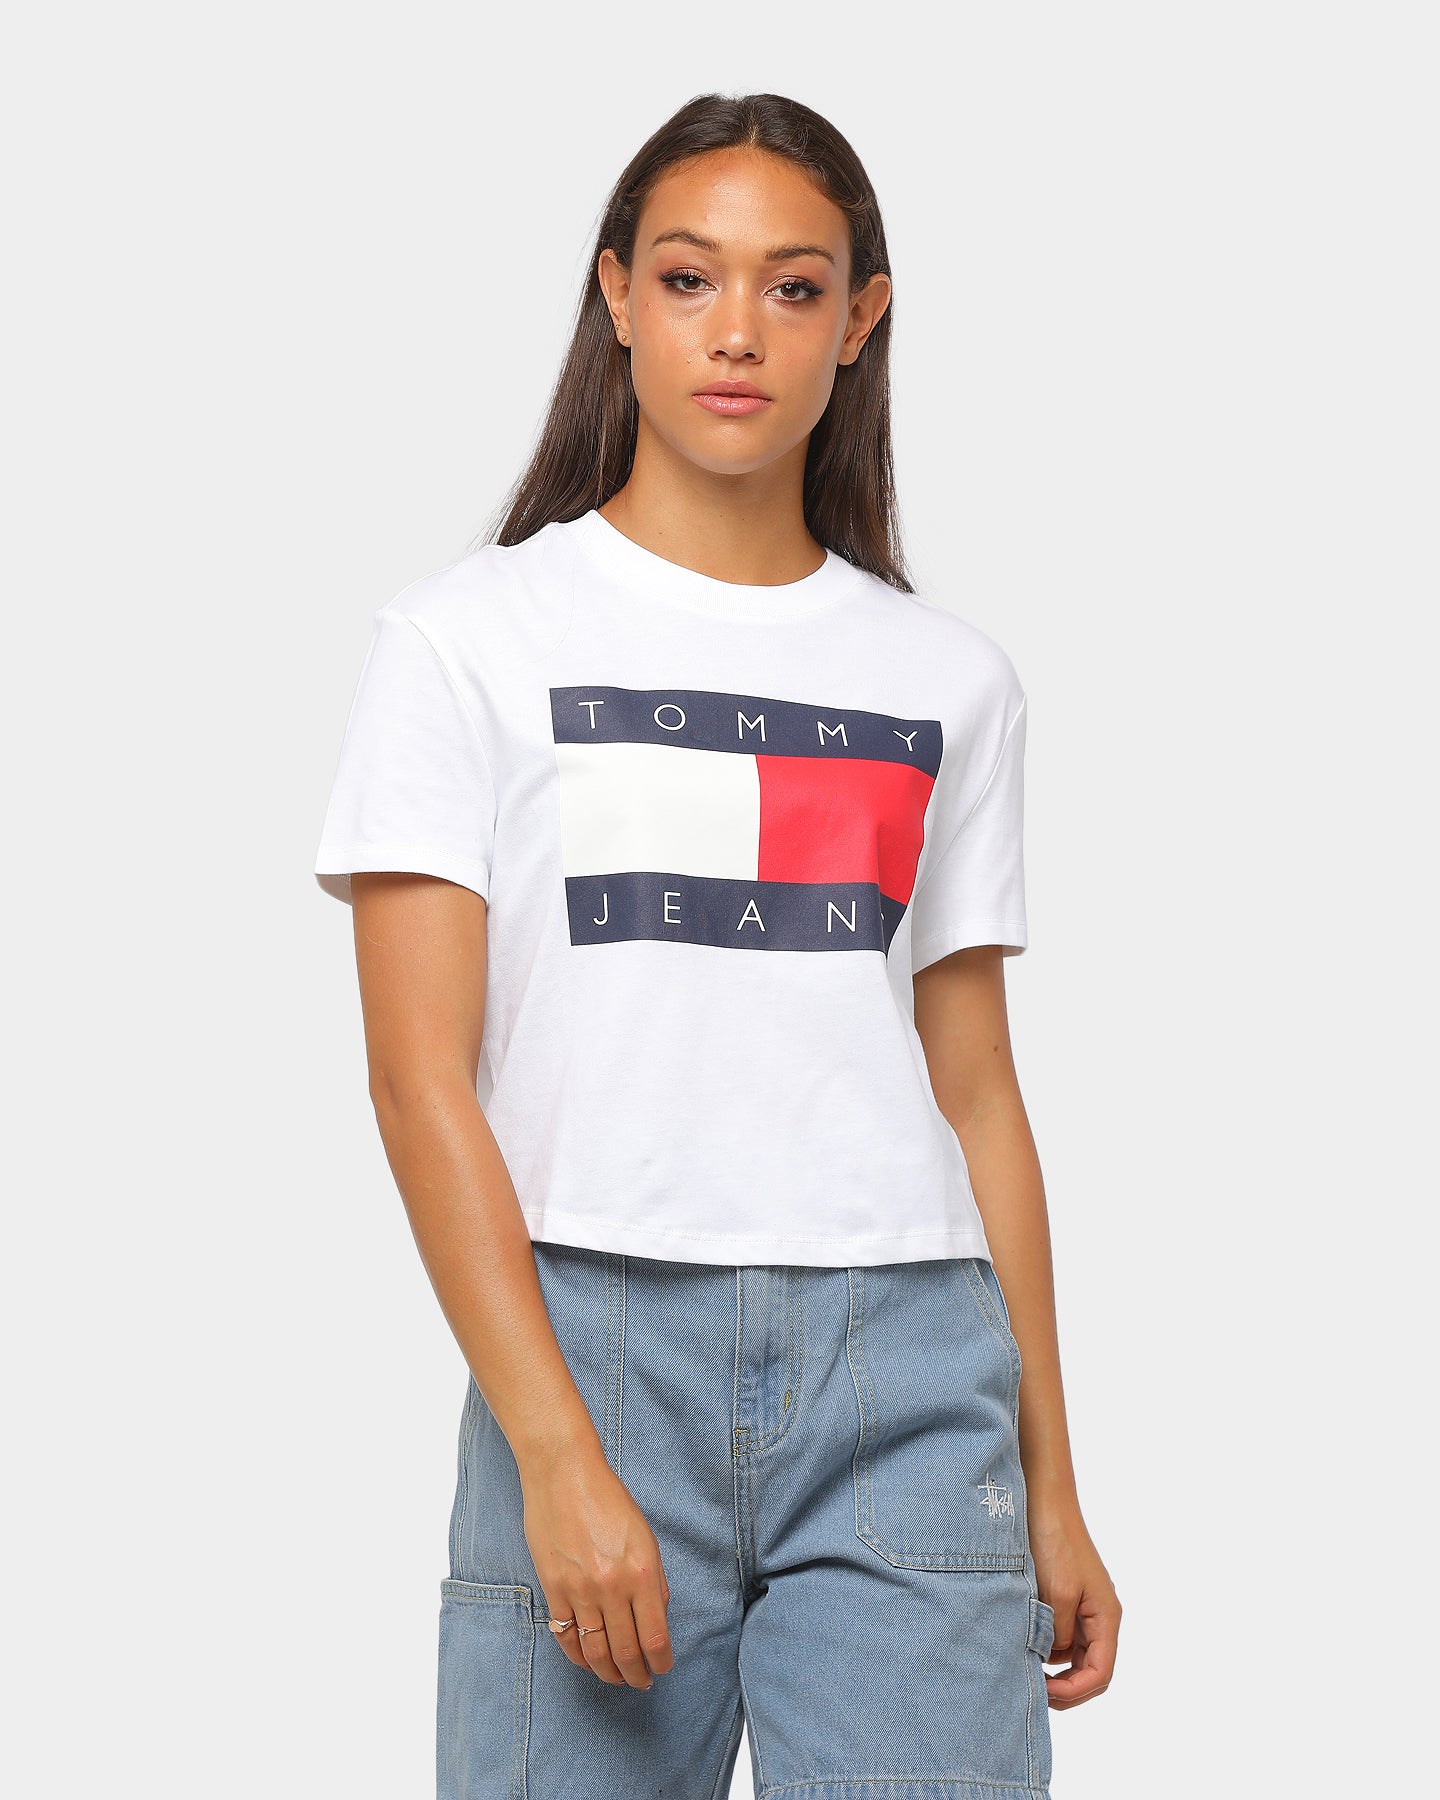 ladies tommy t shirt